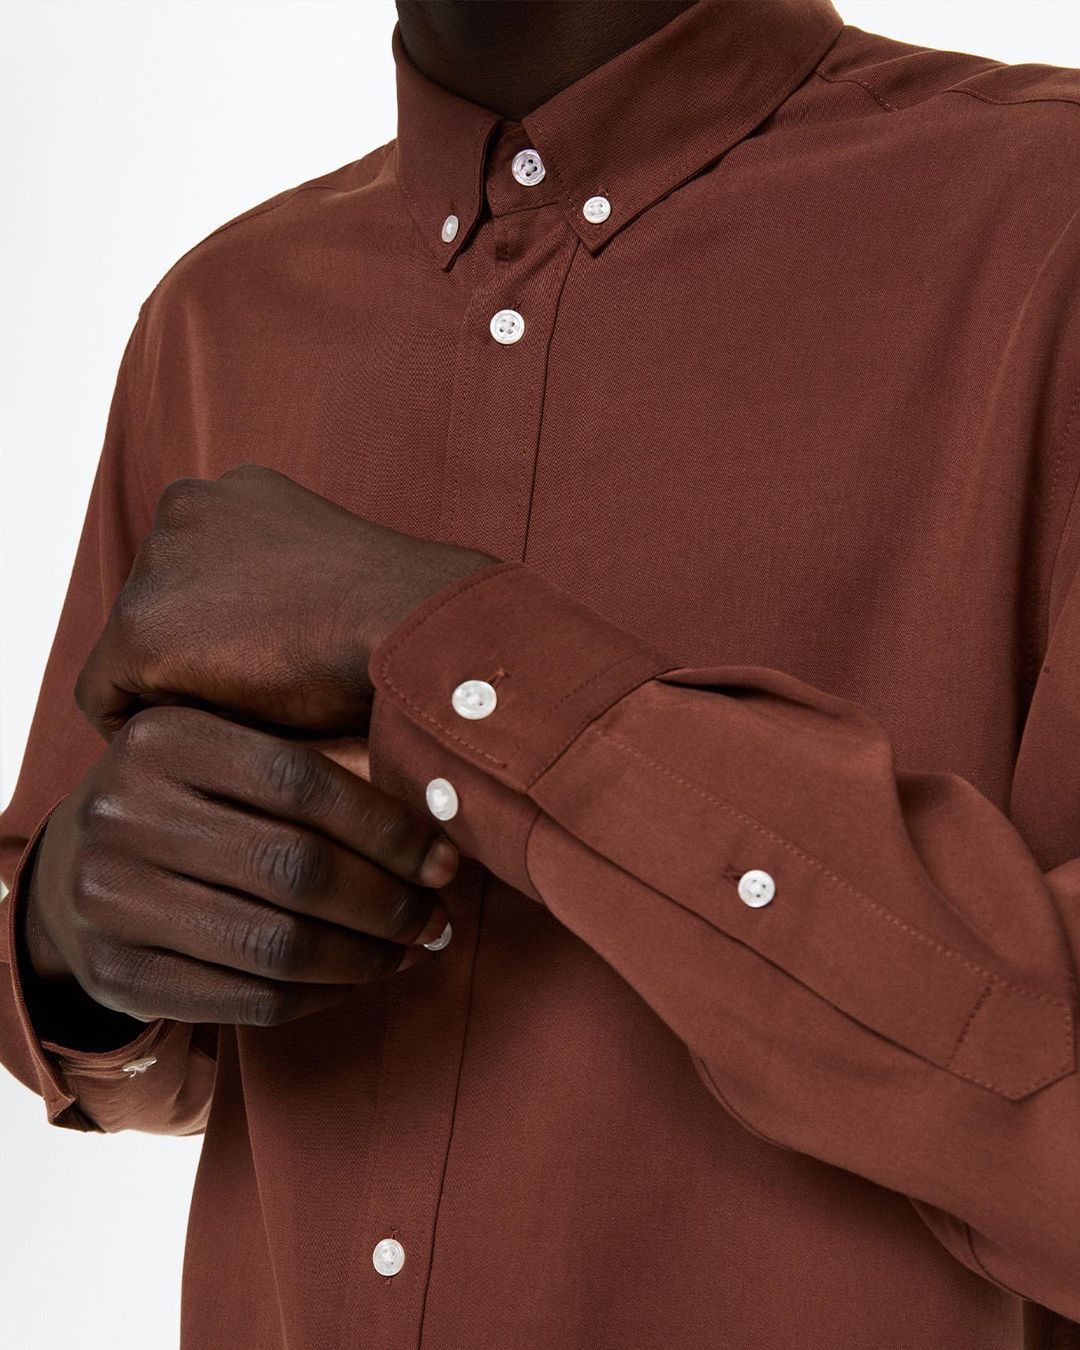 close-up image of model wearing a brown dress shirt with white buttons